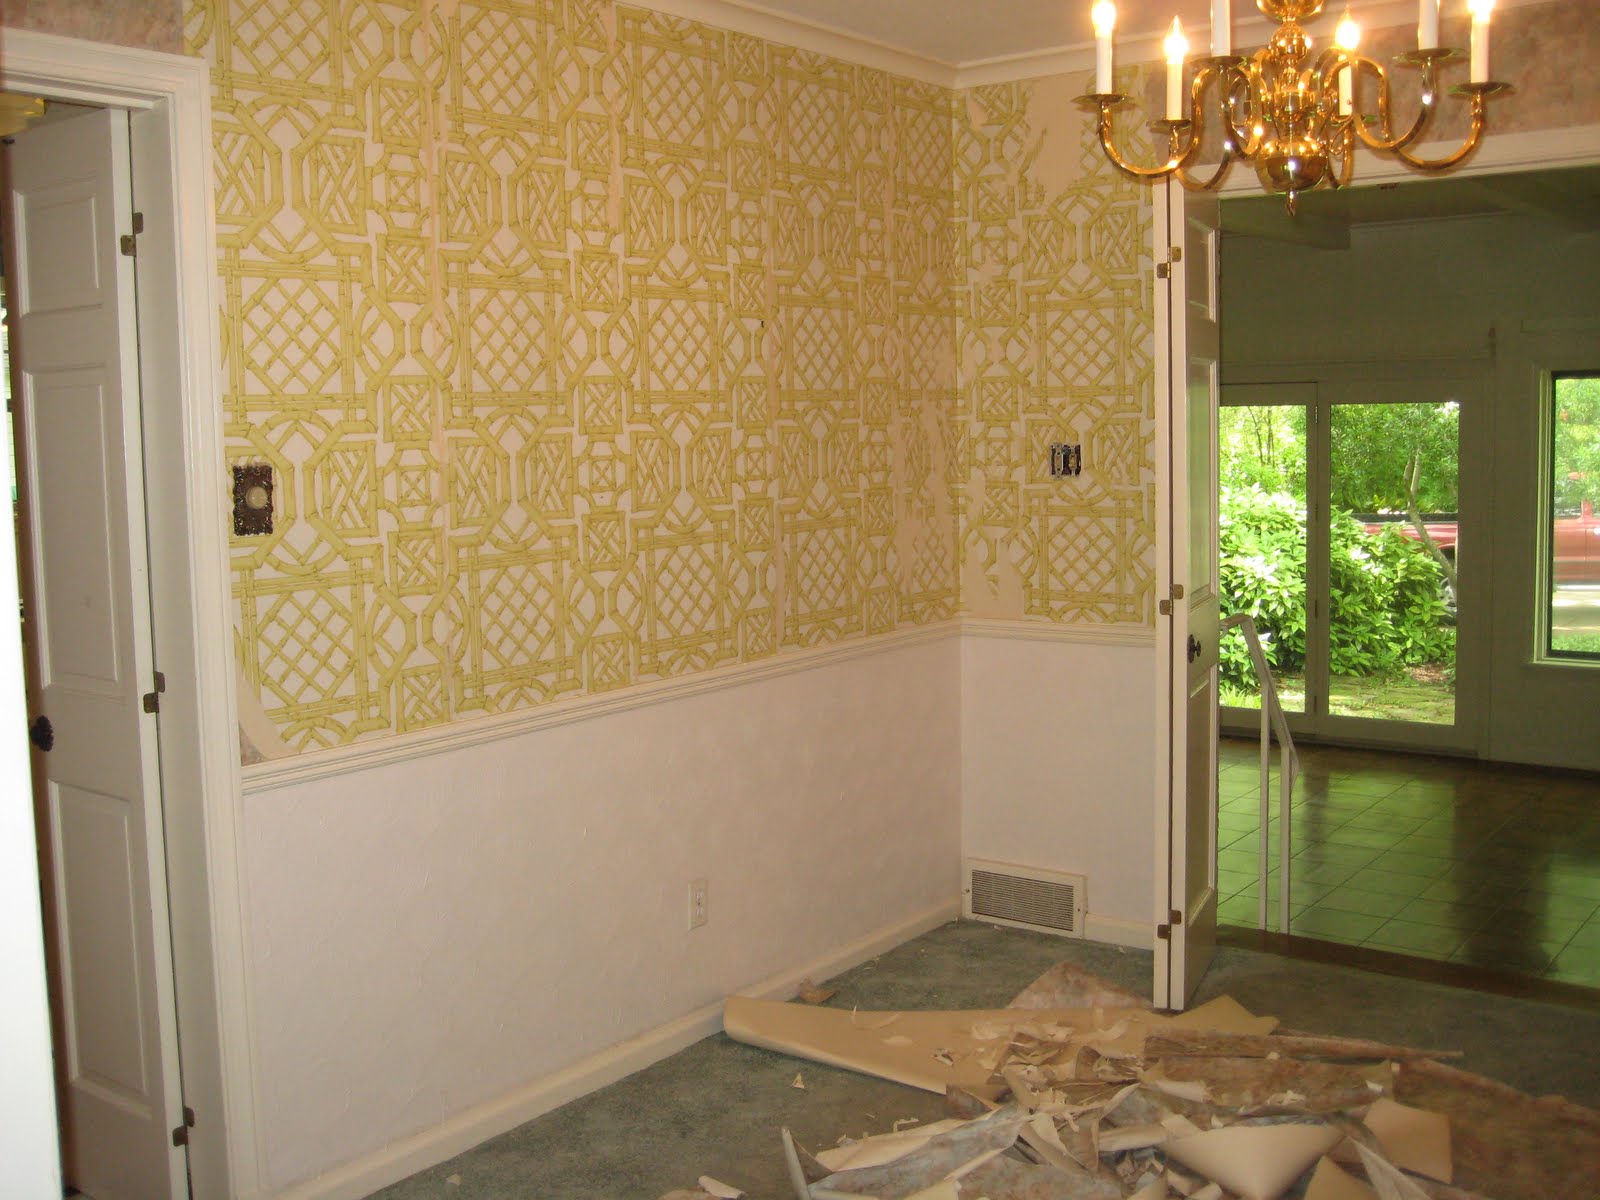 when I posted about it HERE You know when I said the wainscoting